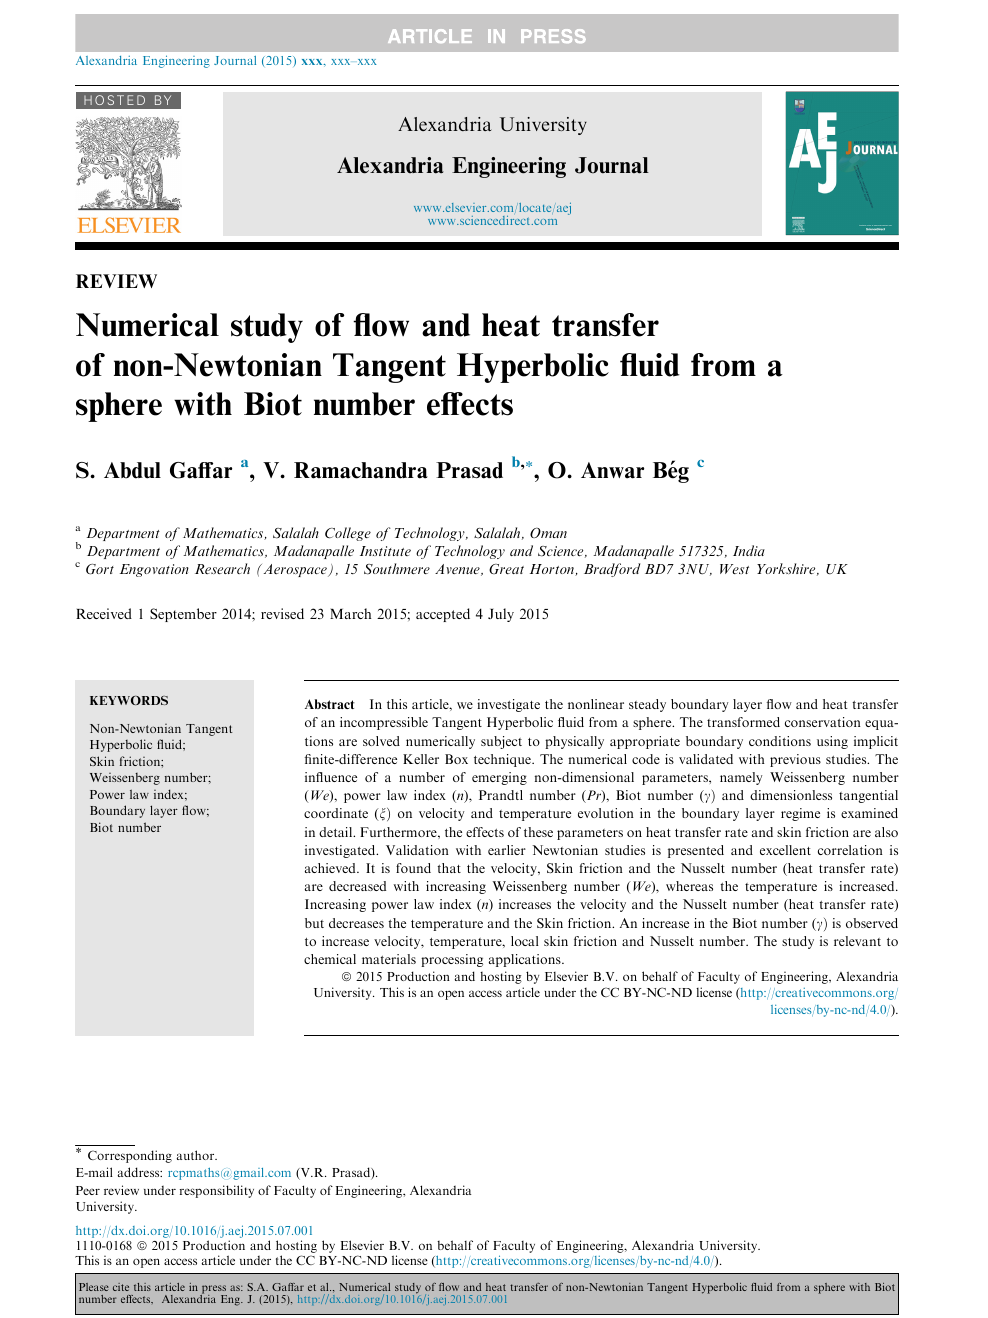 Numerical Study Of Flow And Heat Transfer Of Non Newtonian Tangent Hyperbolic Fluid From A Sphere With Biot Number Effects Topic Of Research Paper In Mathematics Download Scholarly Article Pdf And Read